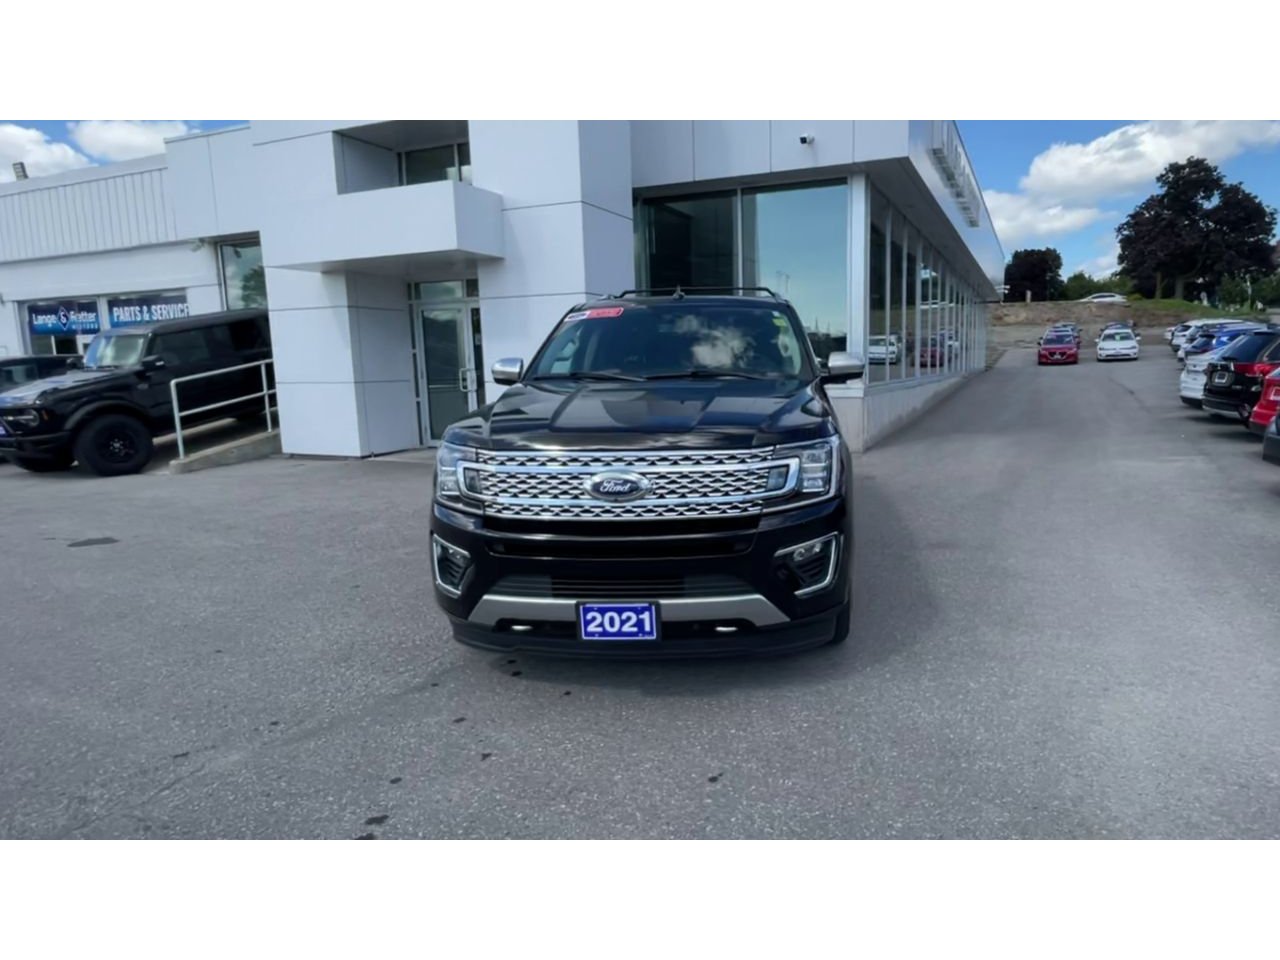 2021 Ford Expedition - P21237 Full Image 3